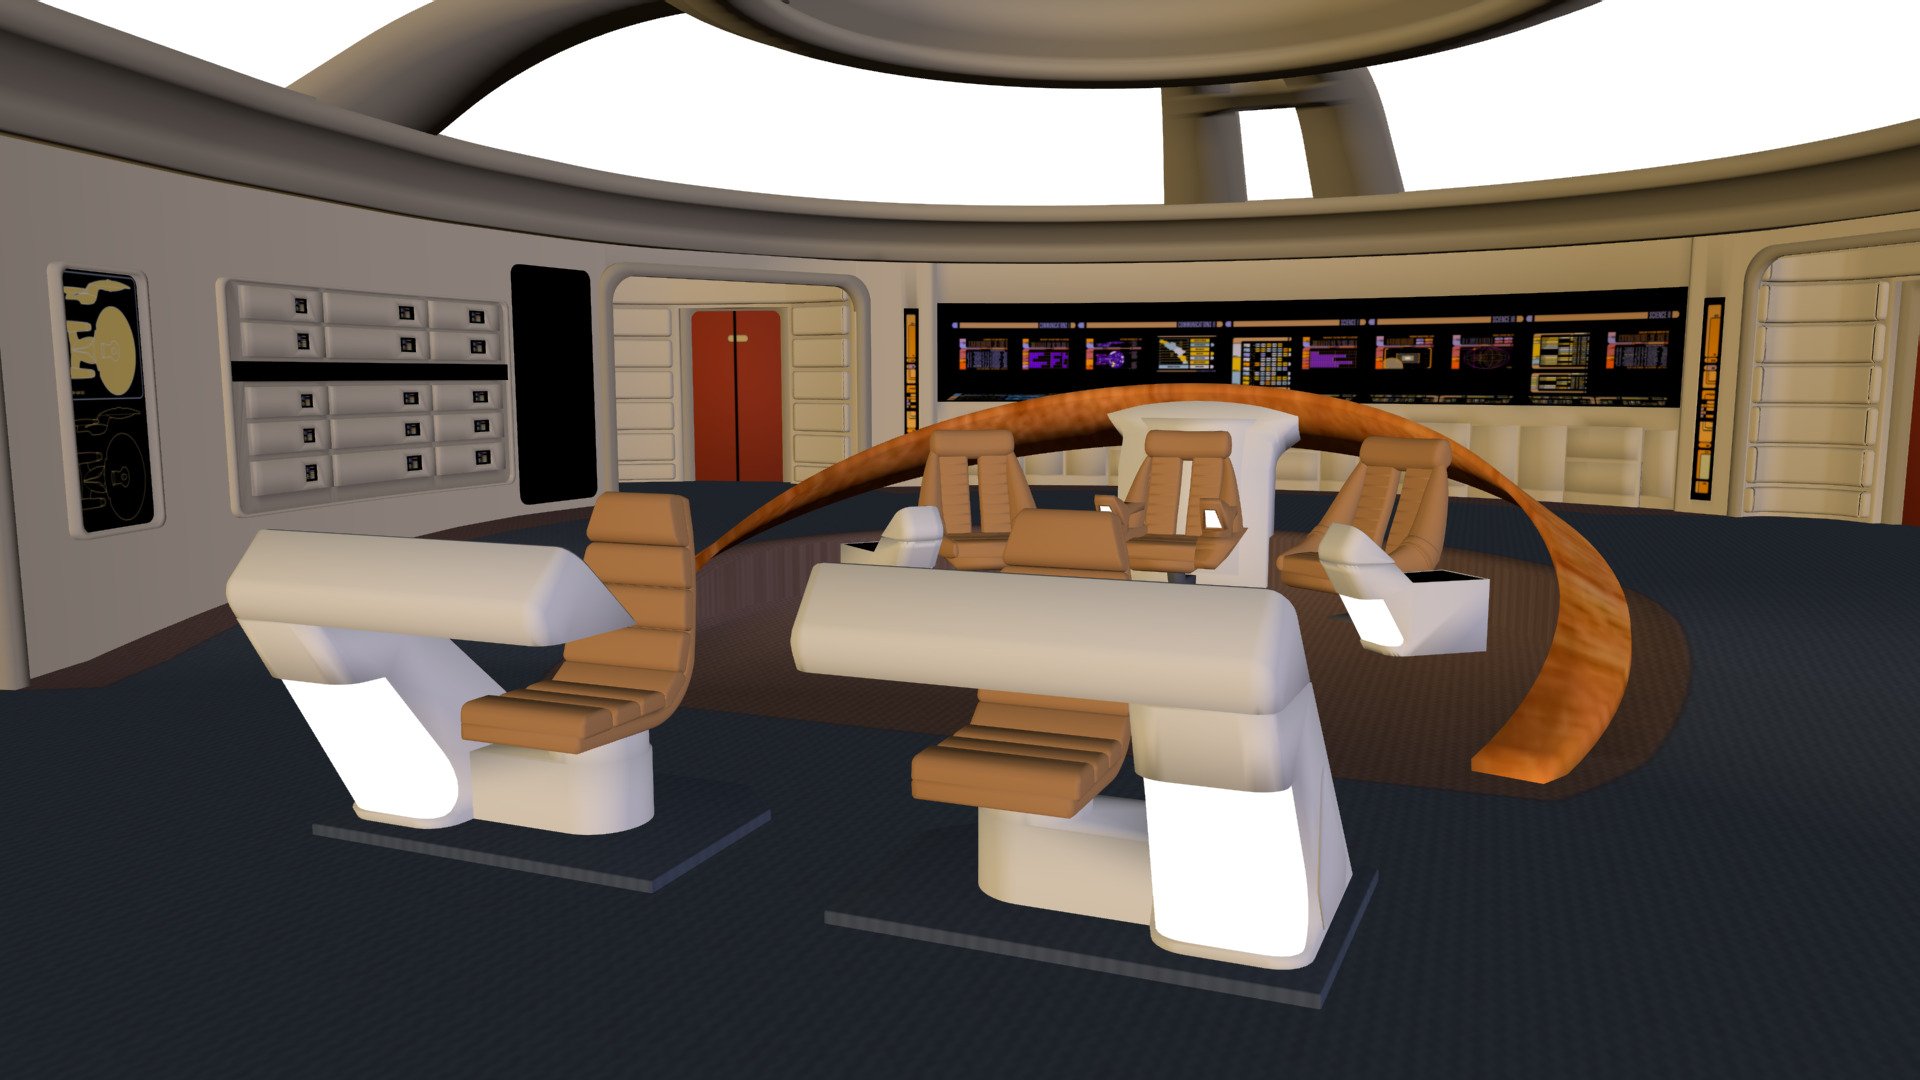 A starship bridge set inspired by the Enterprise-D.

The model includes groups which your software should interpret as separate parts: chairs, helm and ops consoles.
The walls can be hidden or shown for easier camera placement.
Includes the texture maps shown on the image 3d model